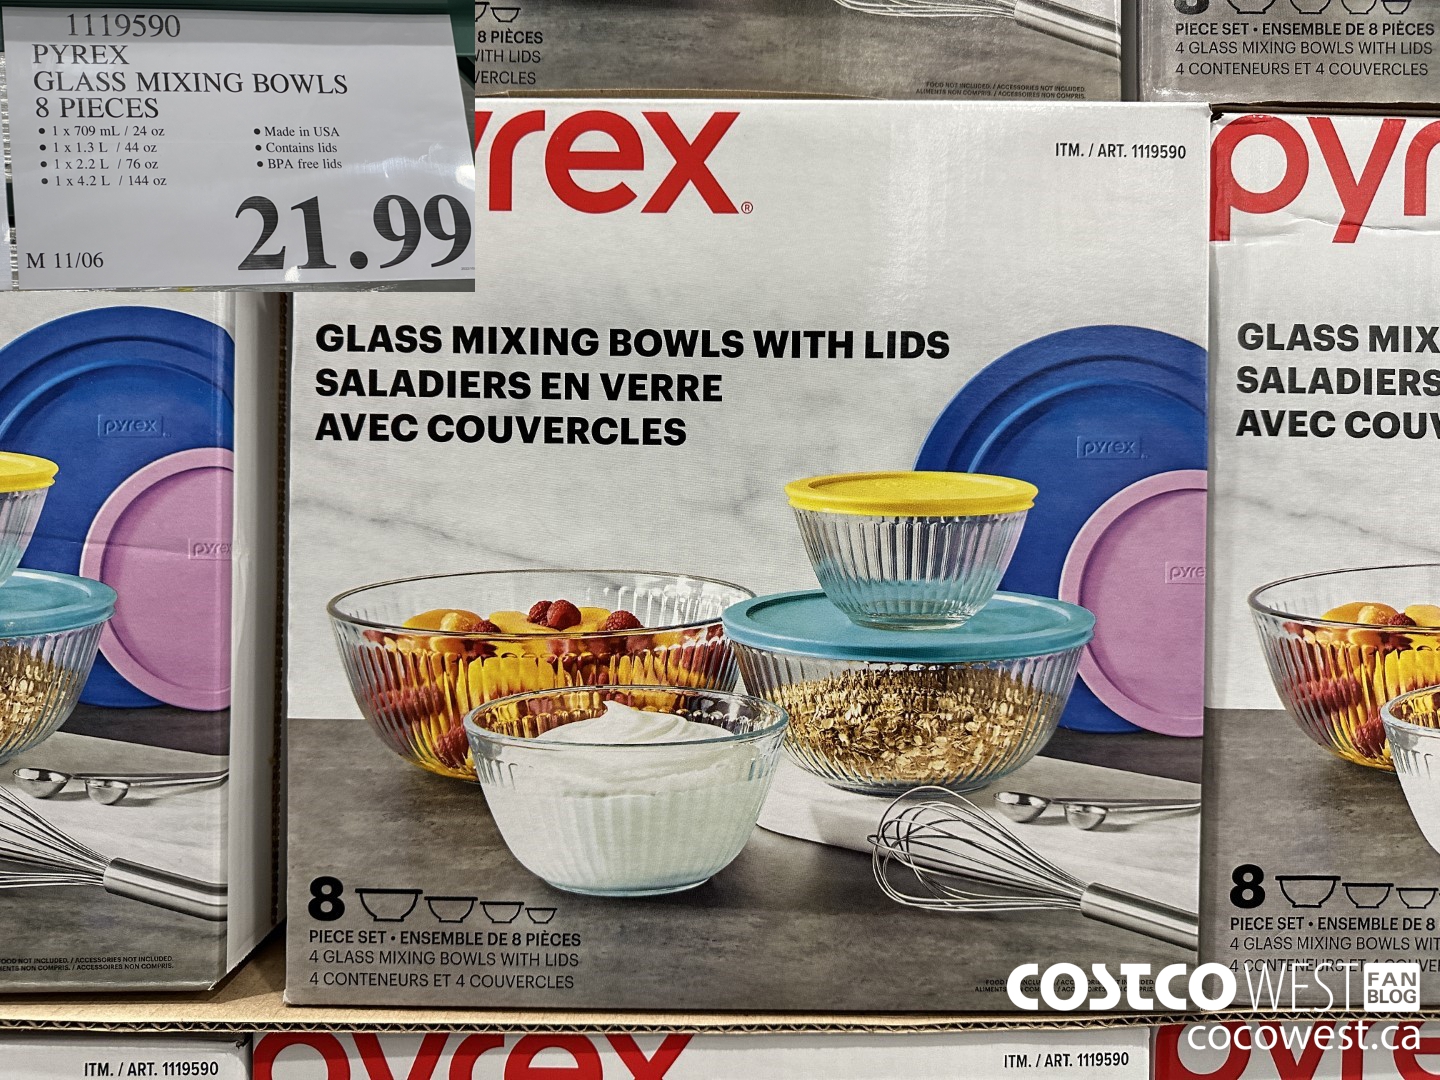 PYREX 3 Piece Glass Measuring Cup Set - Clear NEW IN BOX! # 1615903  AUTHENTIC